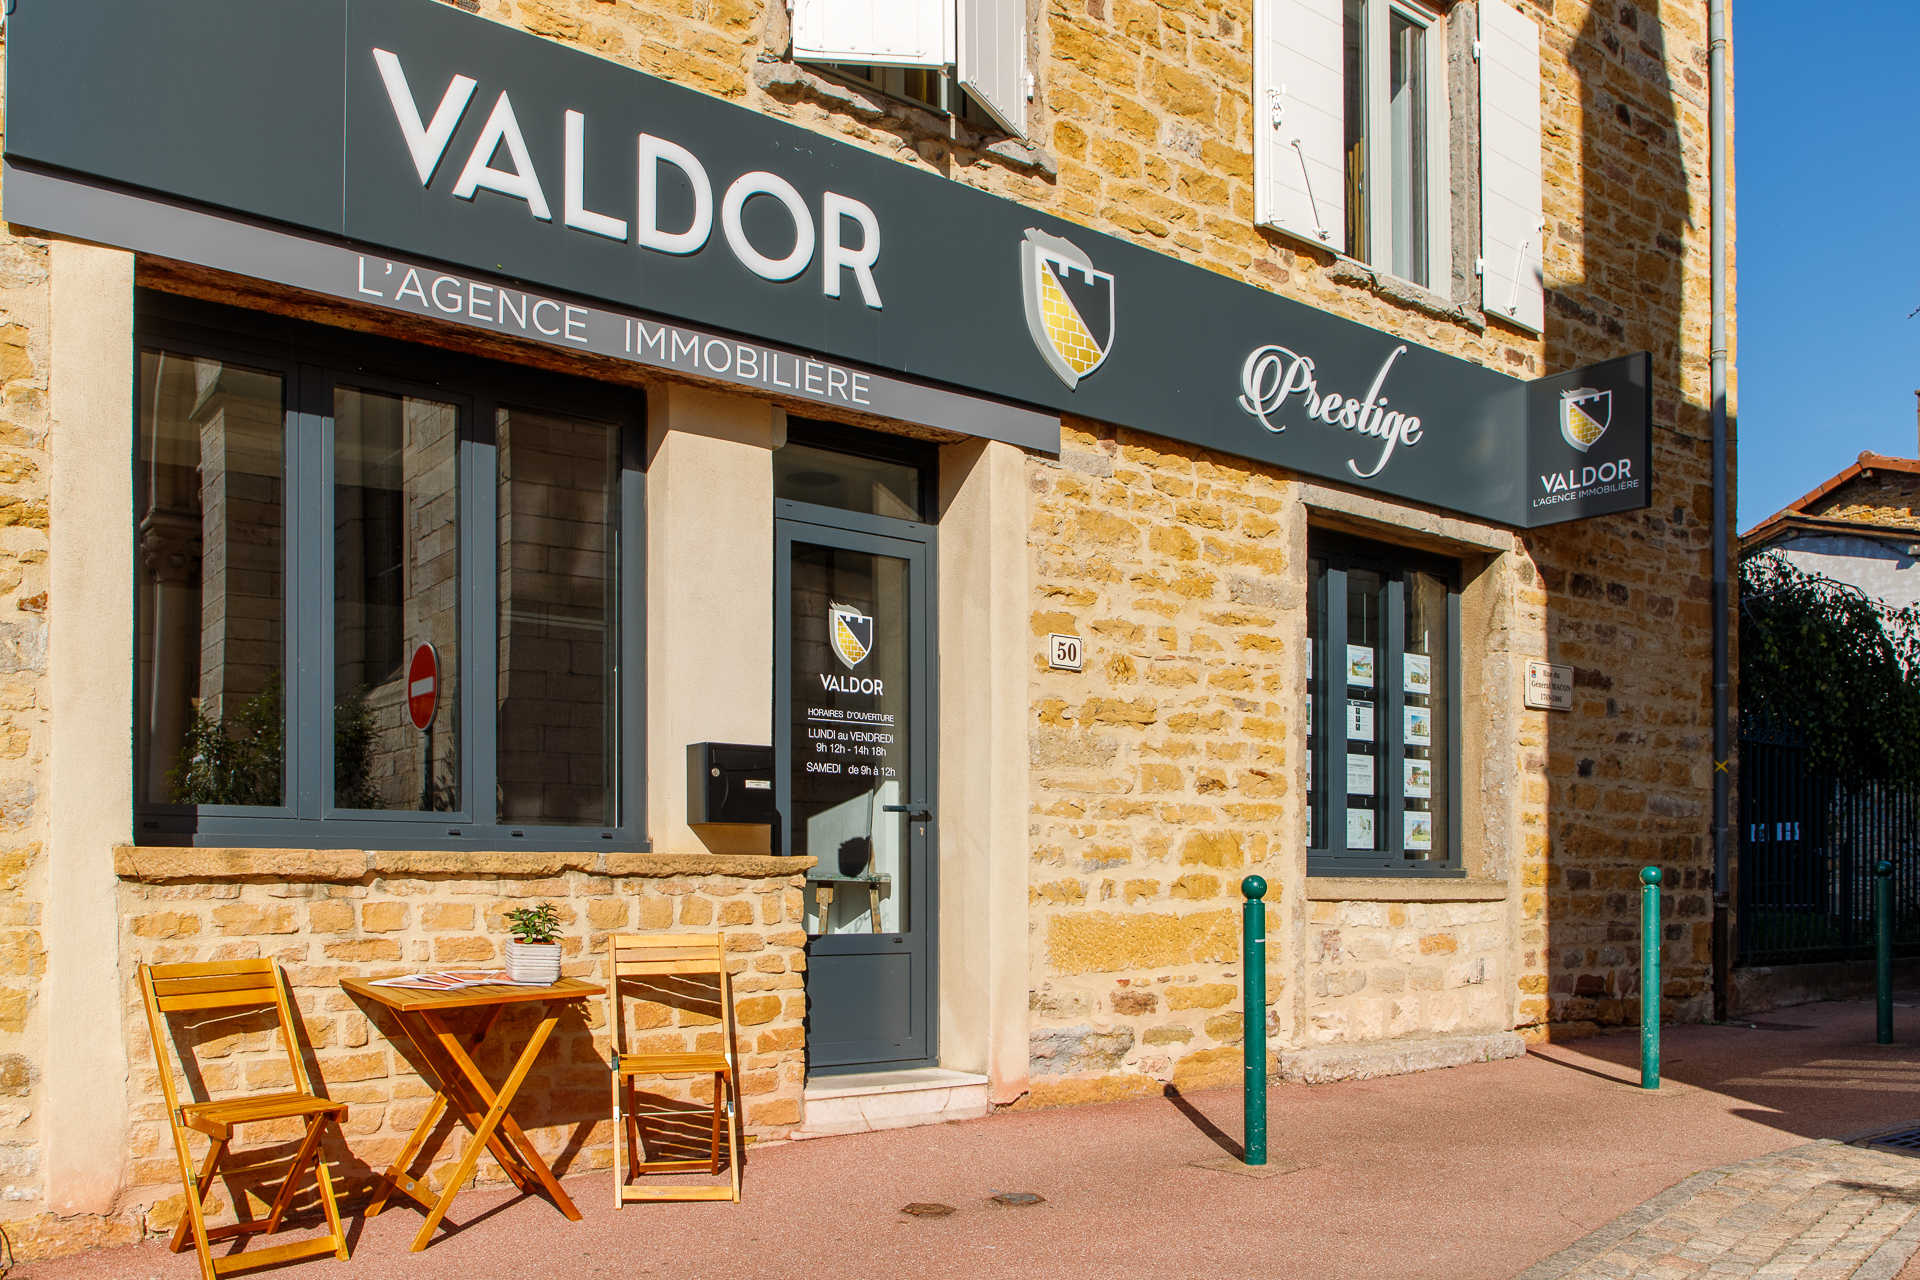 Valdor L'agence Immobilière Chasselay